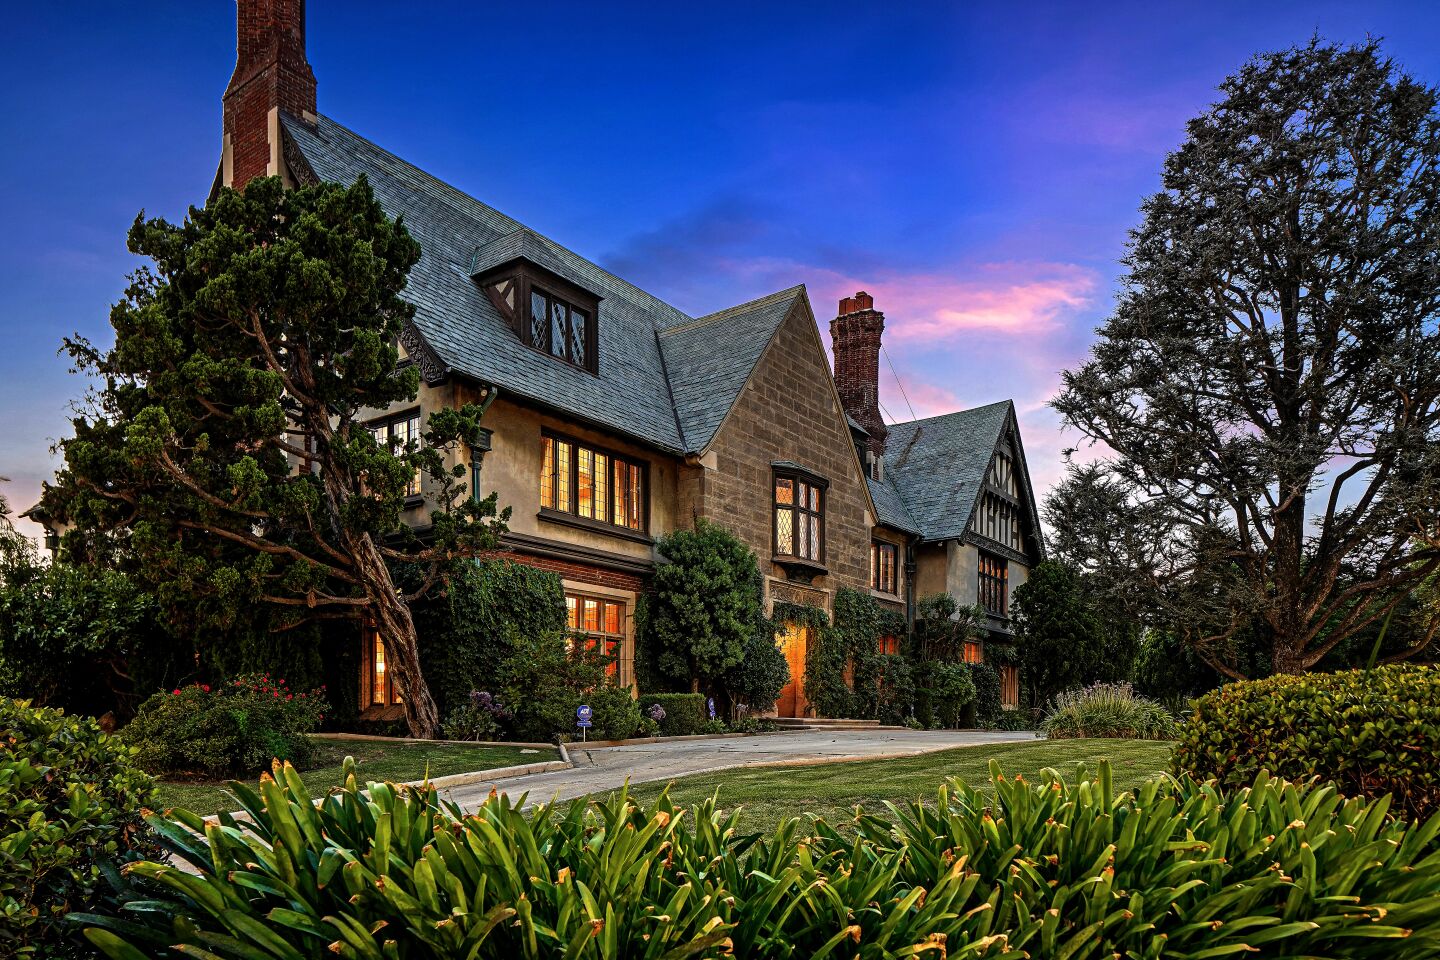 Exterior view of an English Tudor style mansion at sunset